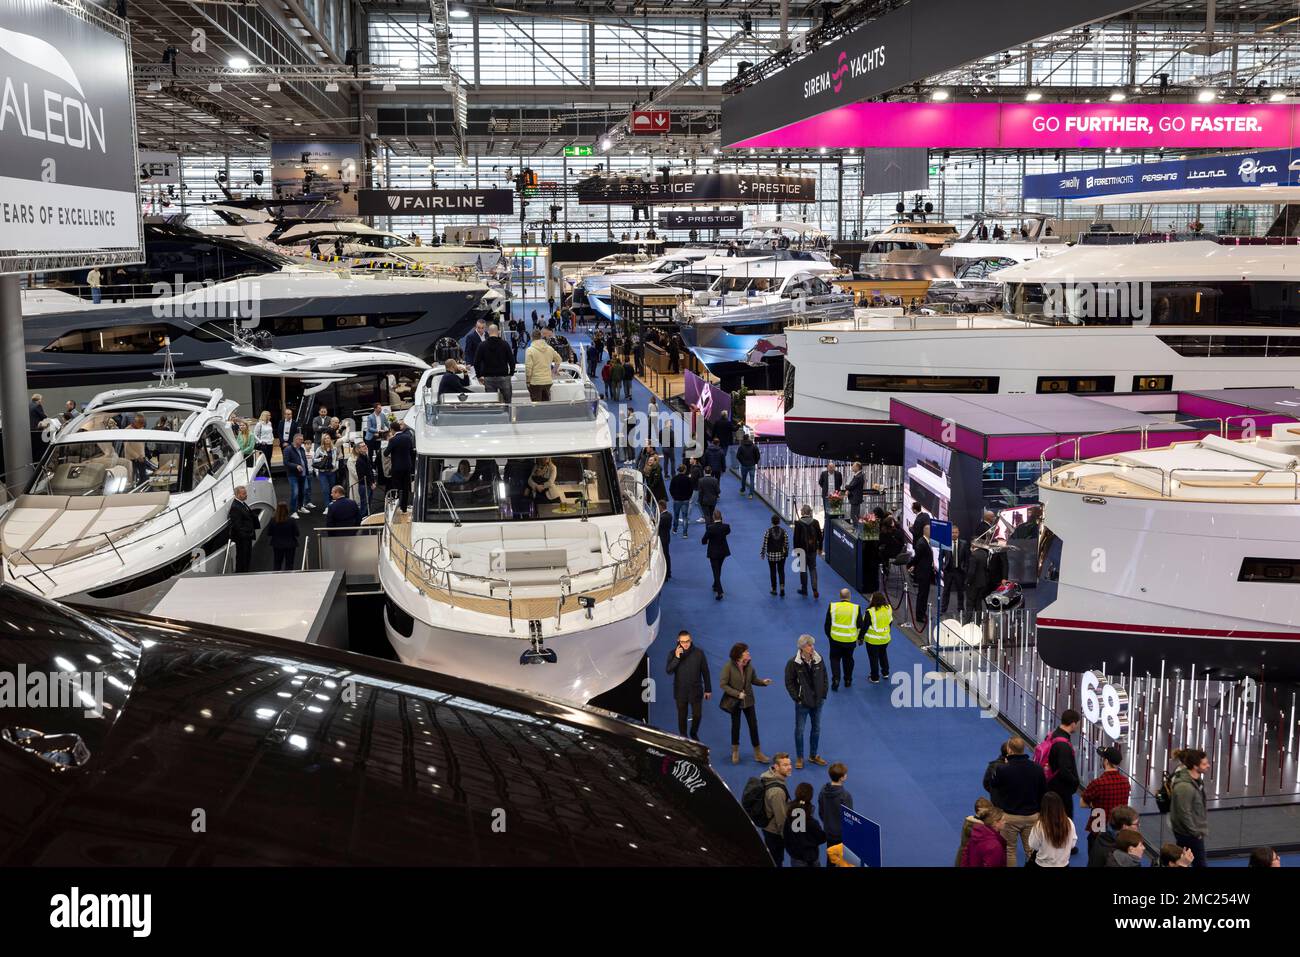 Duesseldorf, Germany. 21st Jan, 2023. Visitors look at expensive yachts in an exhibition hall. After a two-year break from Corona, the boot water sports trade show has opened its doors again. Until January 29, around 1,500 exhibitors from 68 countries will be showing their products and services in 16 halls at the Düsseldorf exhibition center. Credit: Christoph Reichwein/dpa/Alamy Live News Stock Photo